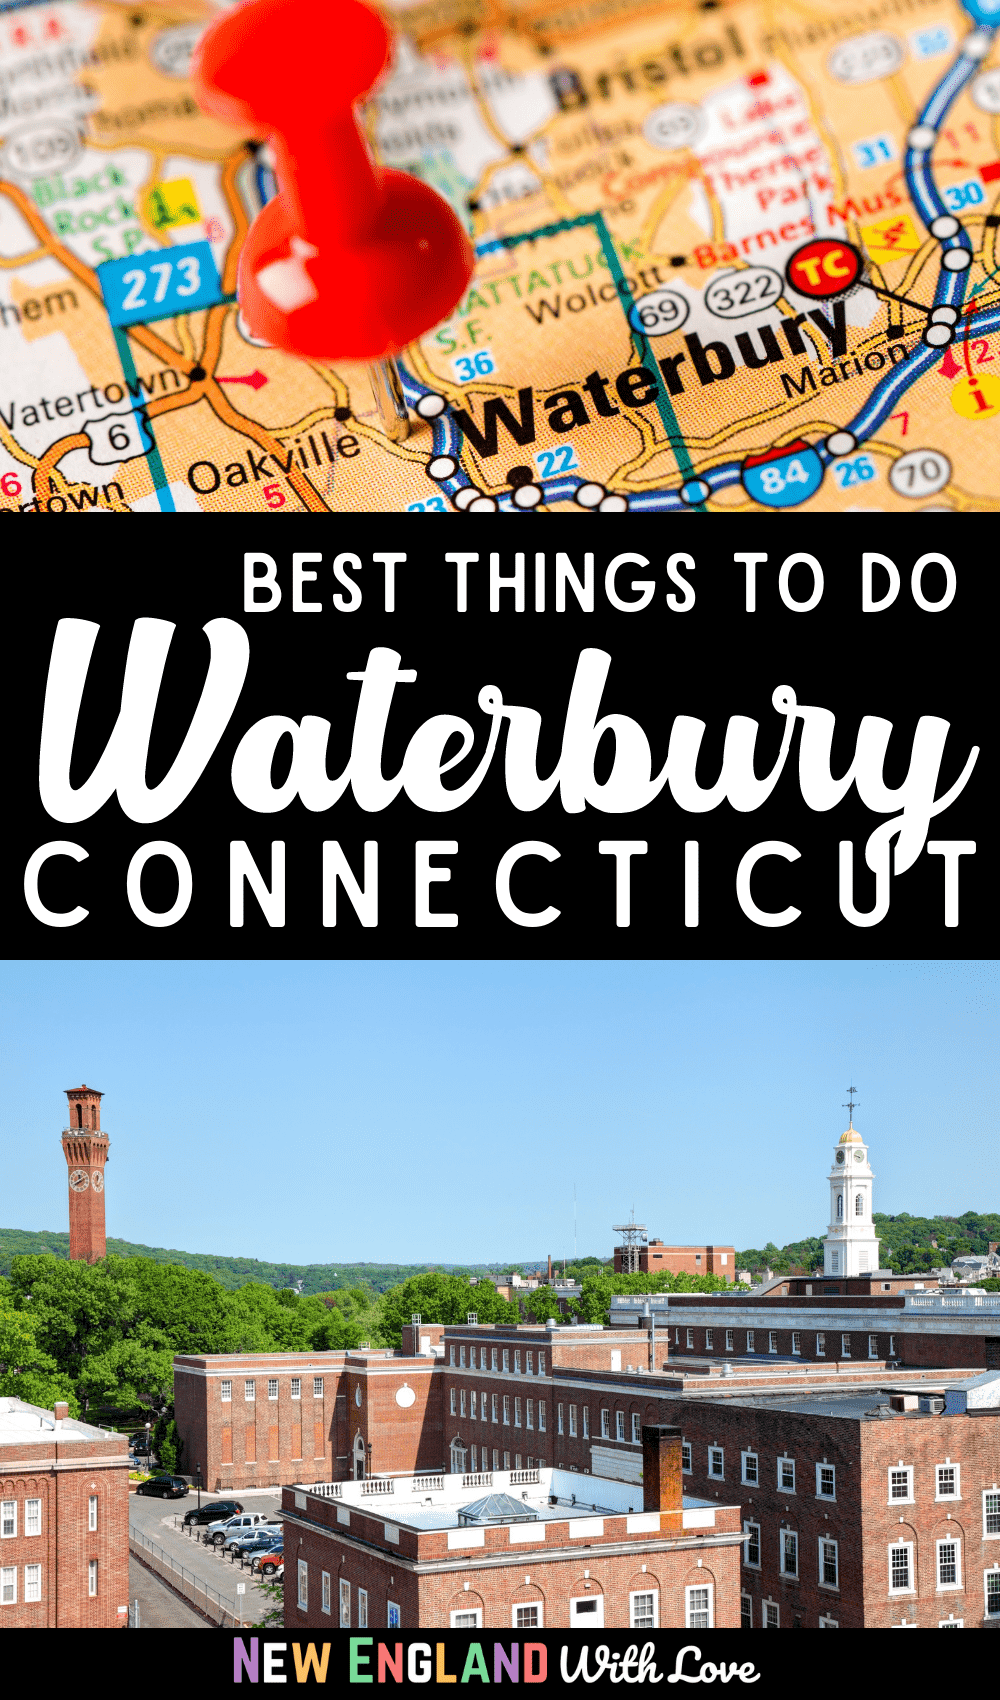 Pinterest graphic reading "Best Things To Do Waterbury Connecticut"